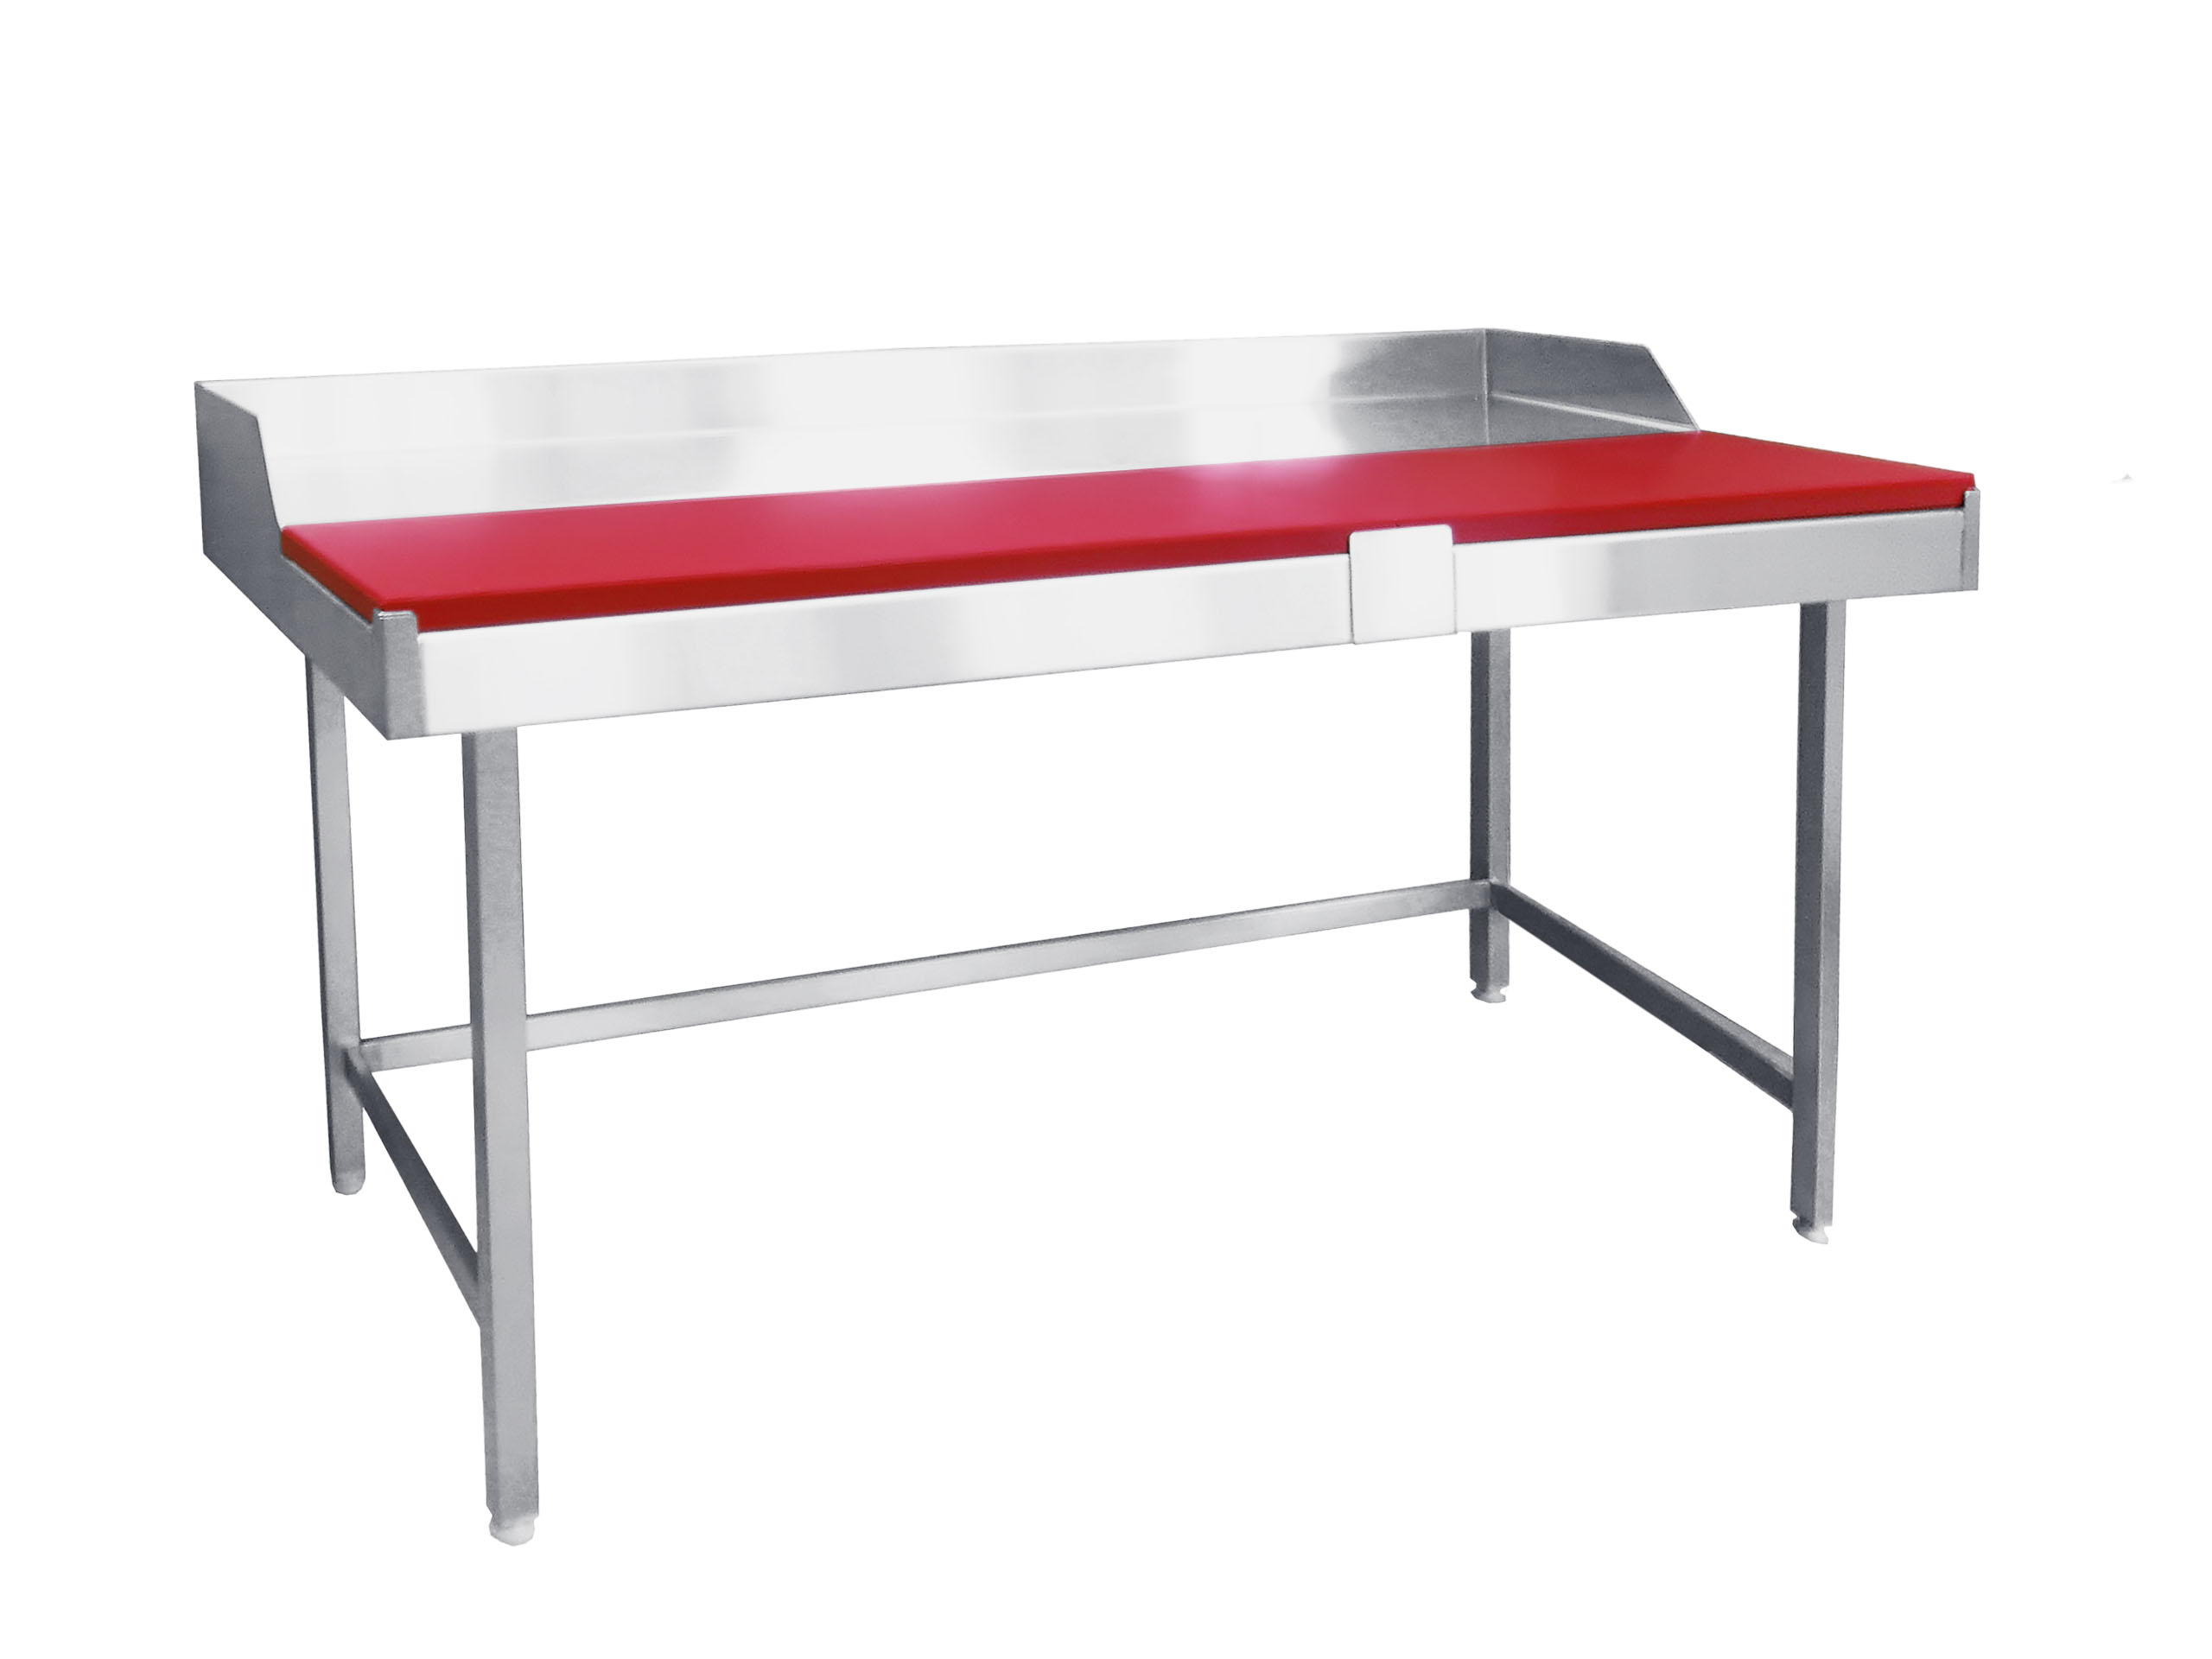 Meat processing table